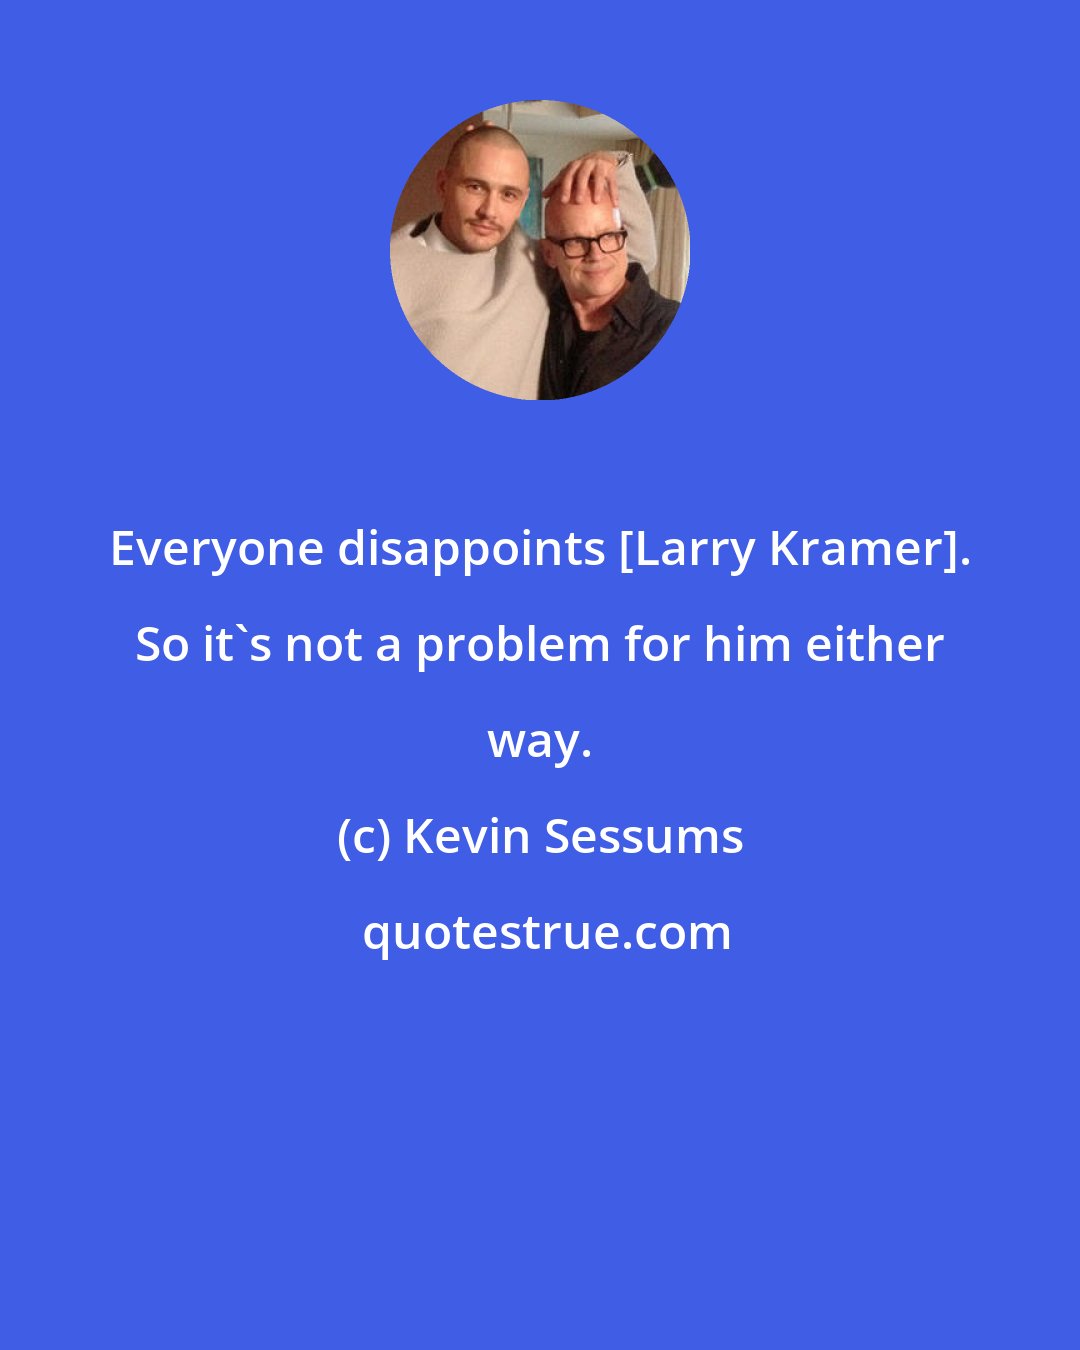 Kevin Sessums: Everyone disappoints [Larry Kramer]. So it's not a problem for him either way.